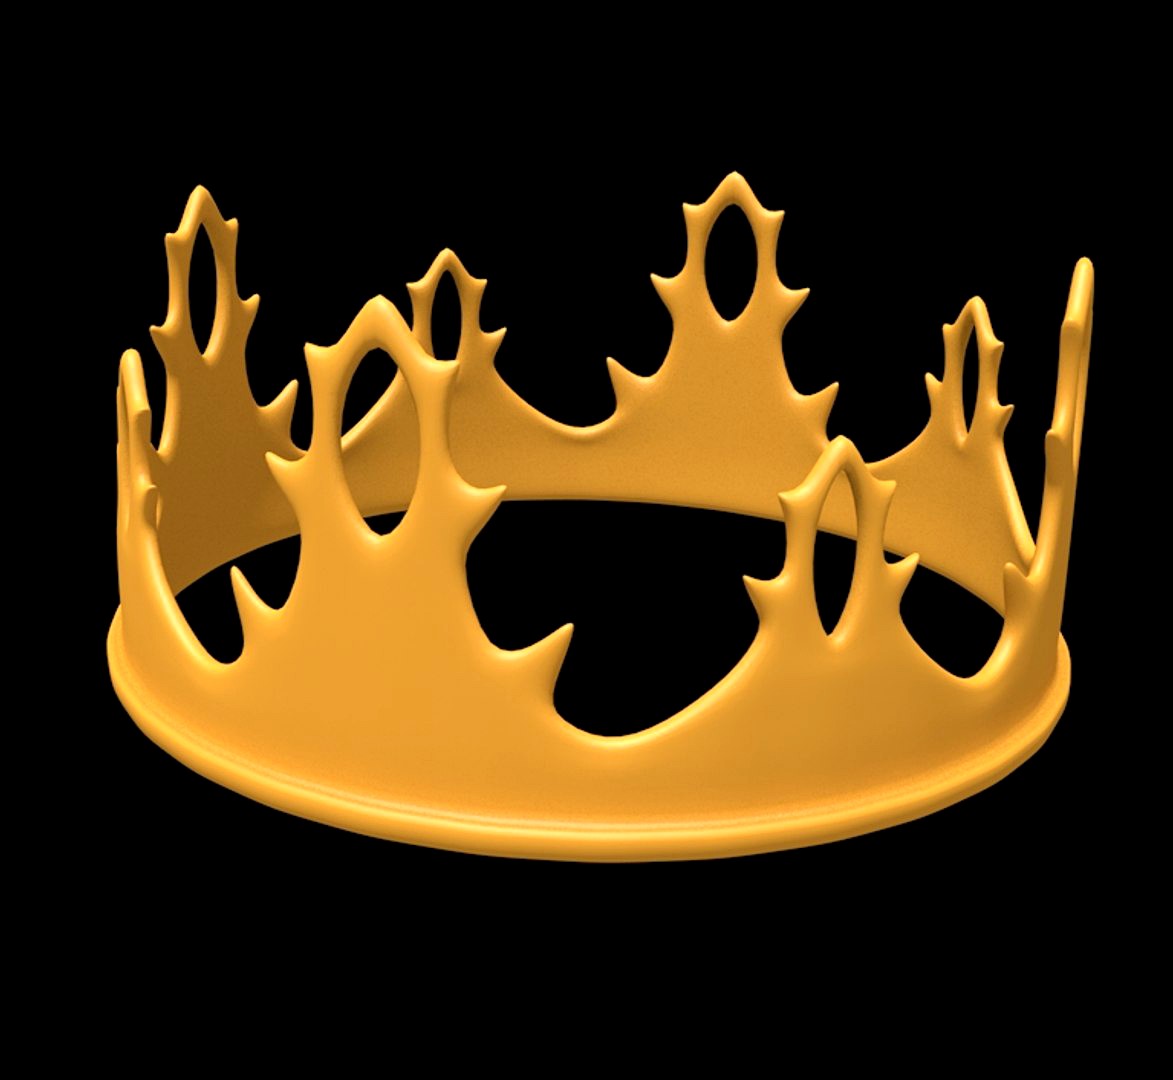 Crown with thorns